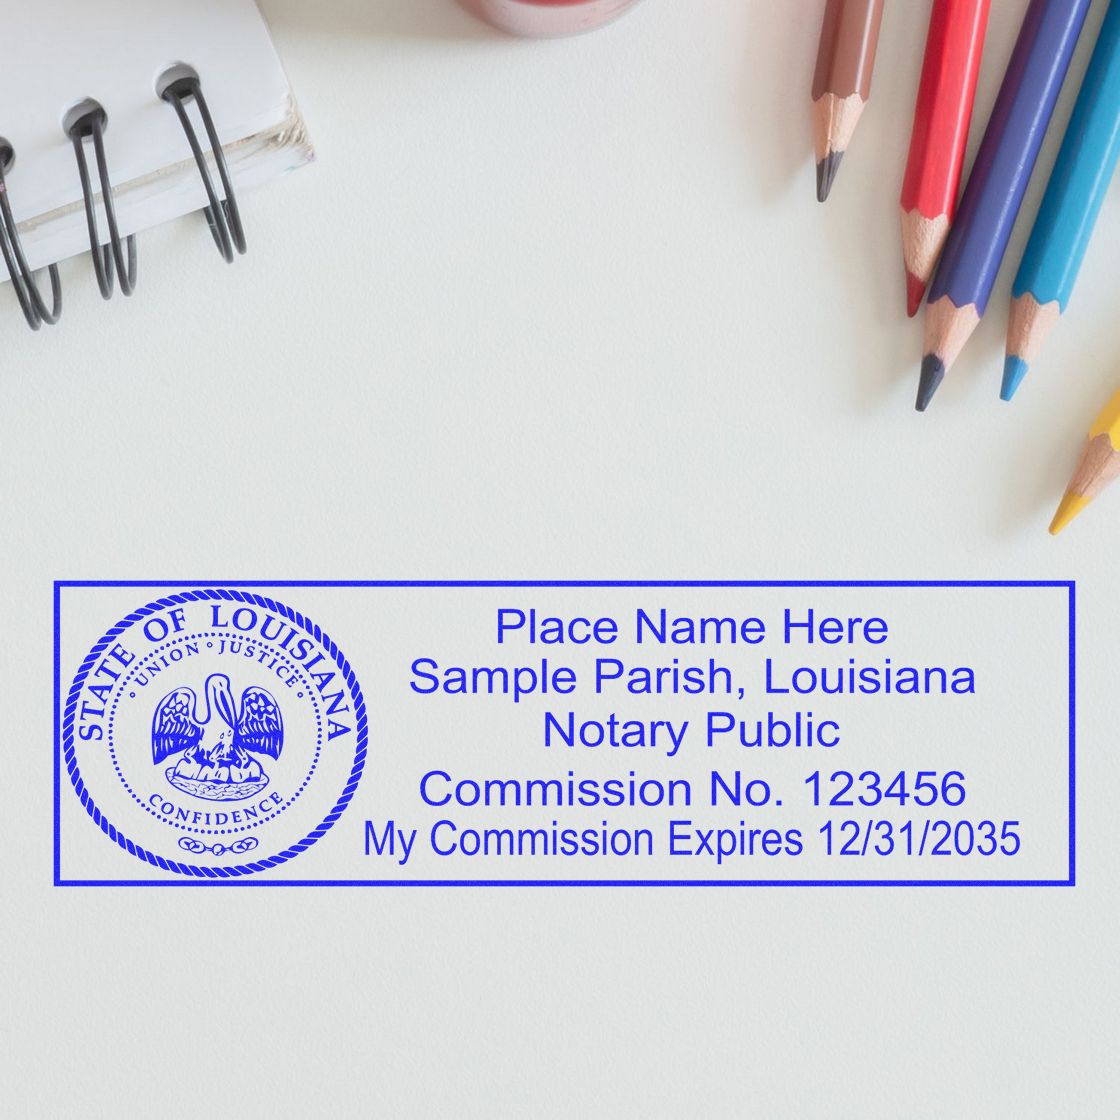 The main image for the Super Slim Louisiana Notary Public Stamp depicting a sample of the imprint and electronic files